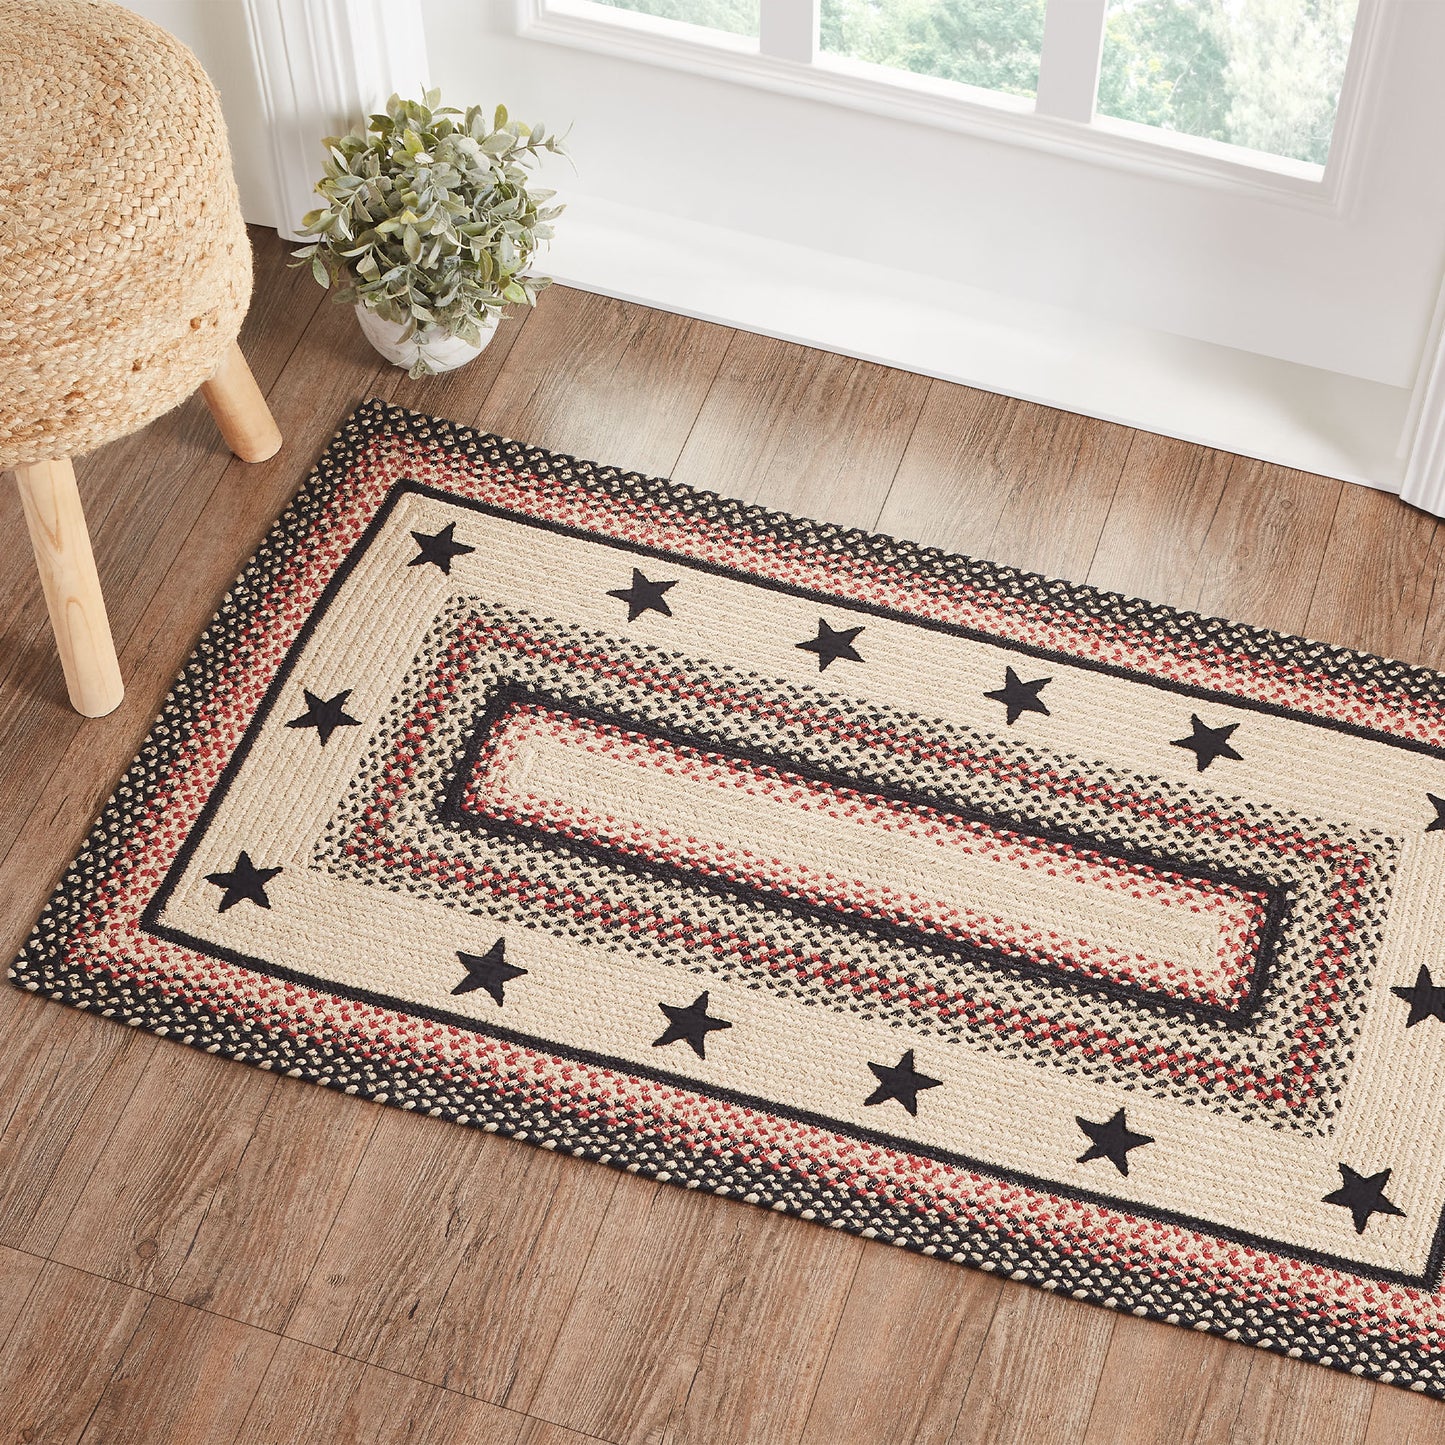 67013-Colonial-Star-Jute-Rug-Rect-w-Pad-27x48-image-6